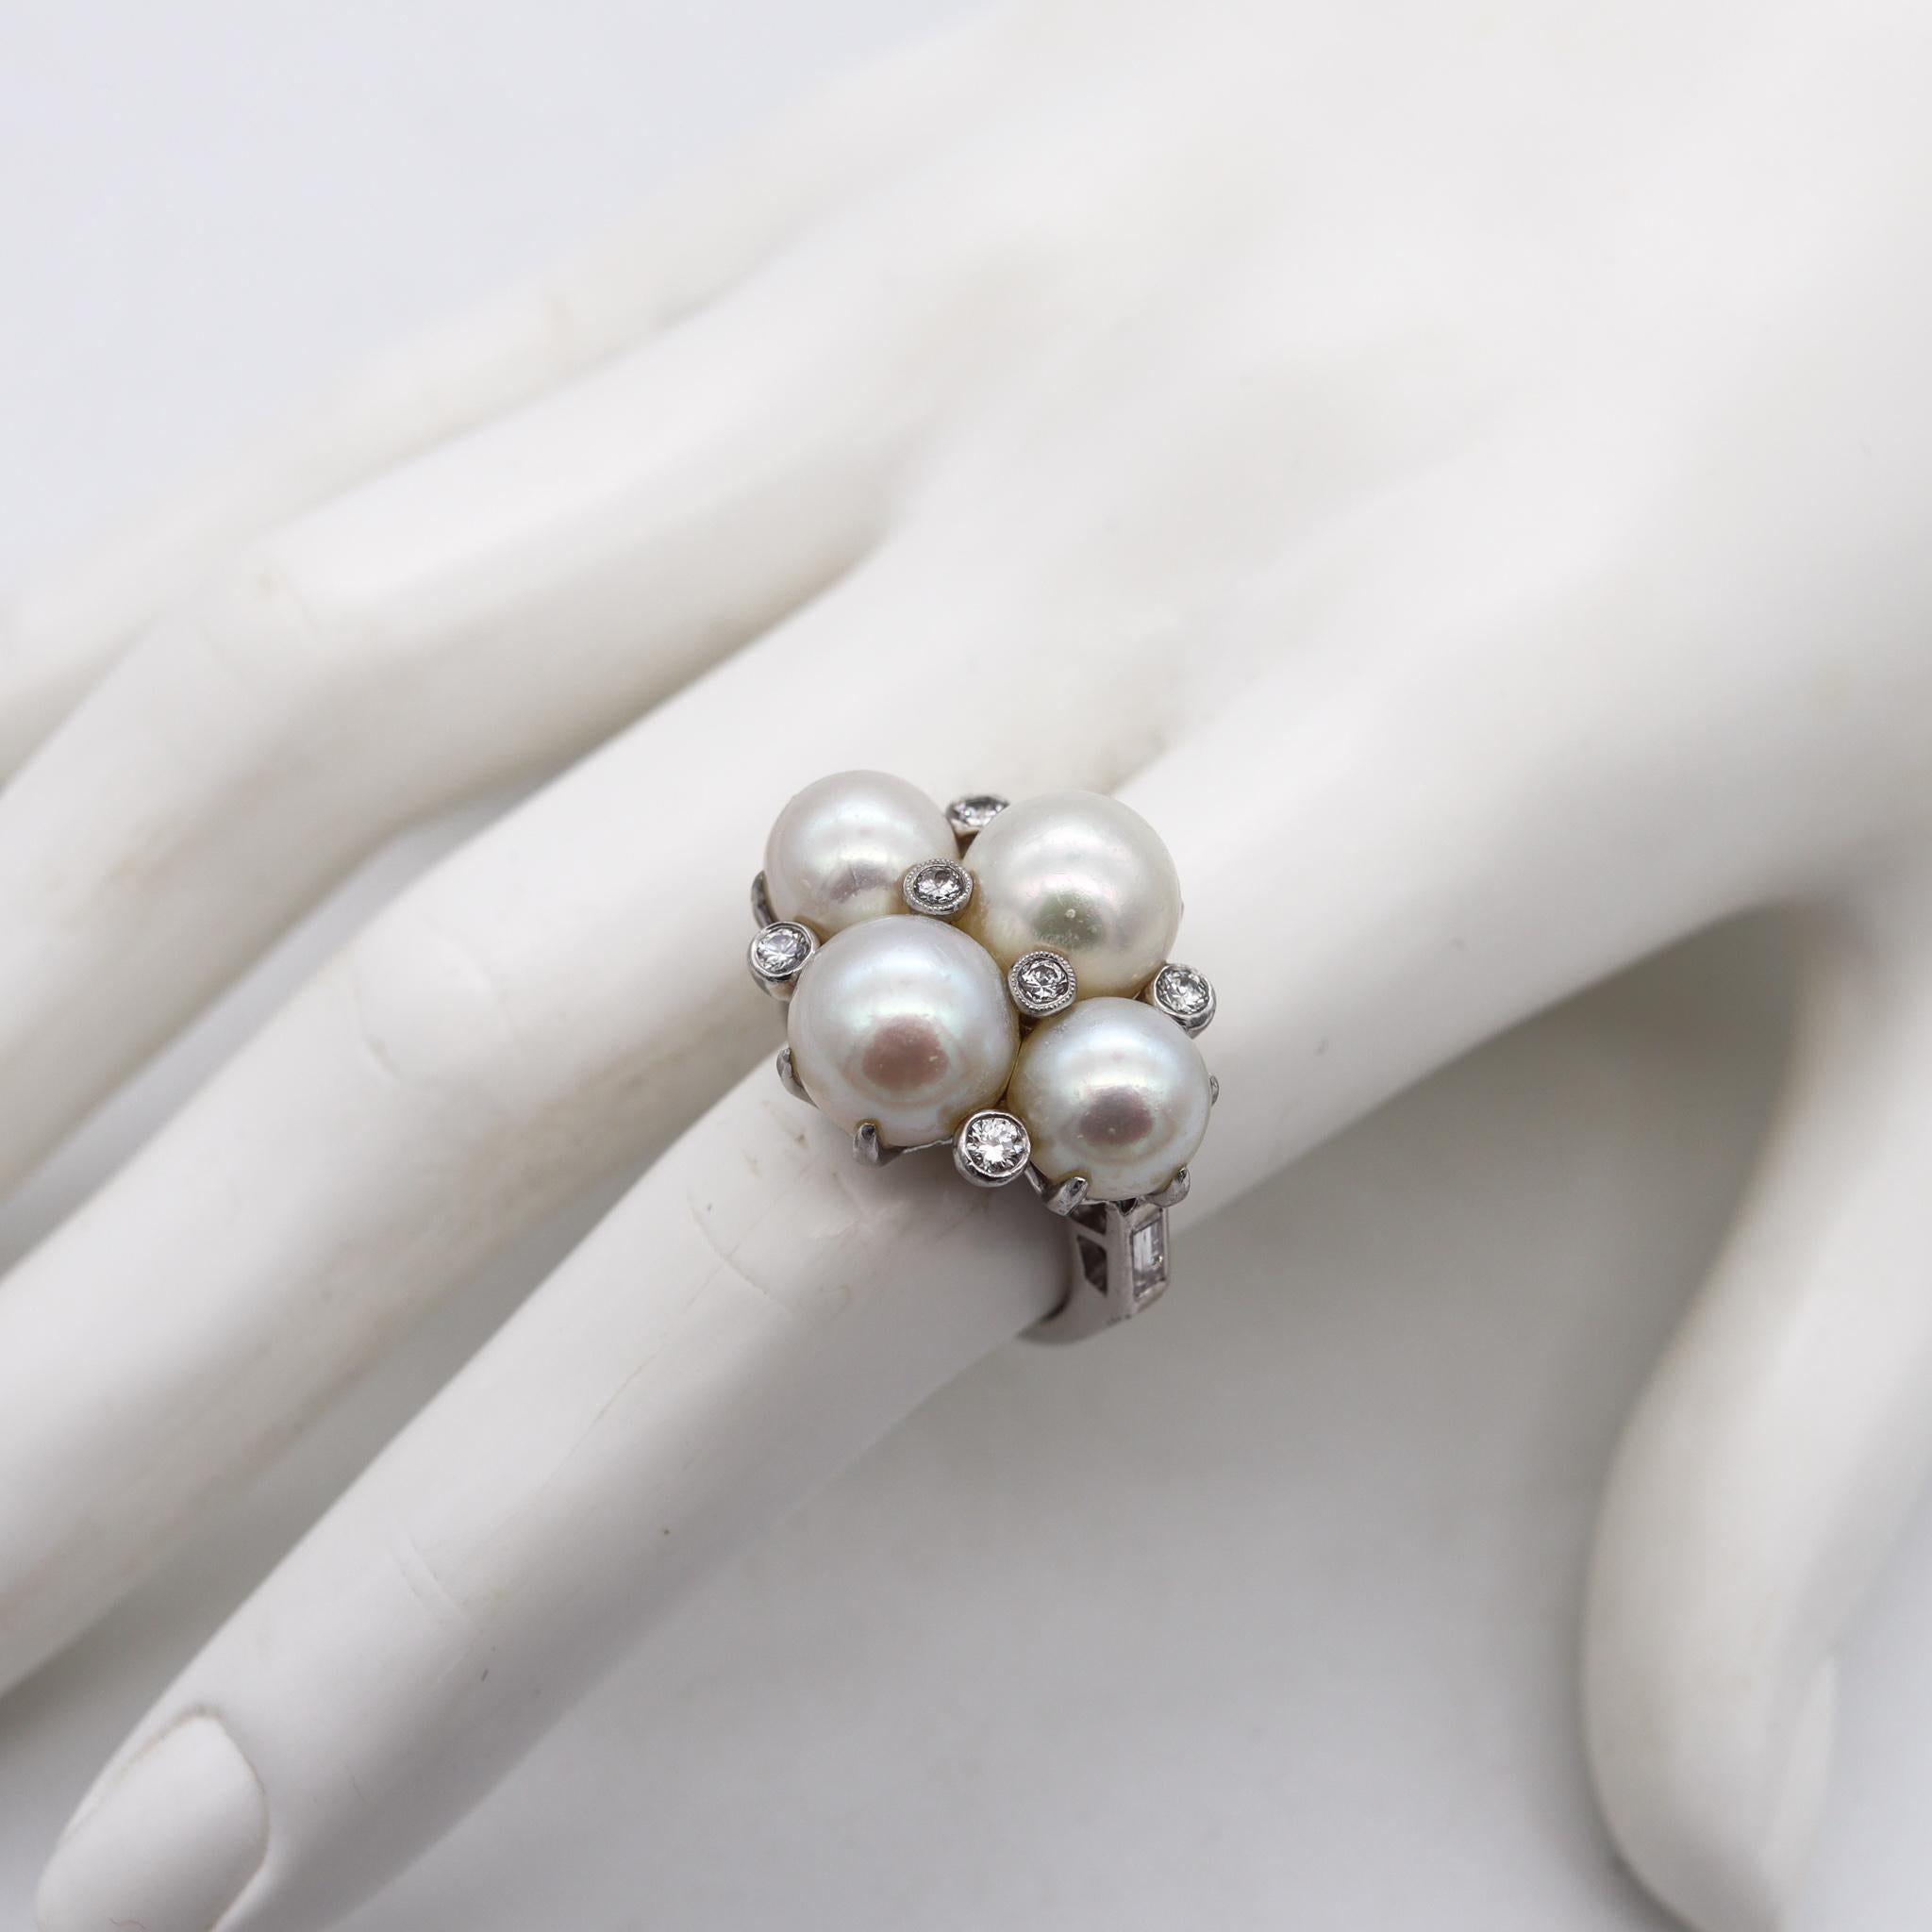 Oscar Heyman 1940 Art Deco Cocktail Ring In Platinum With Diamonds & White Pearl 3